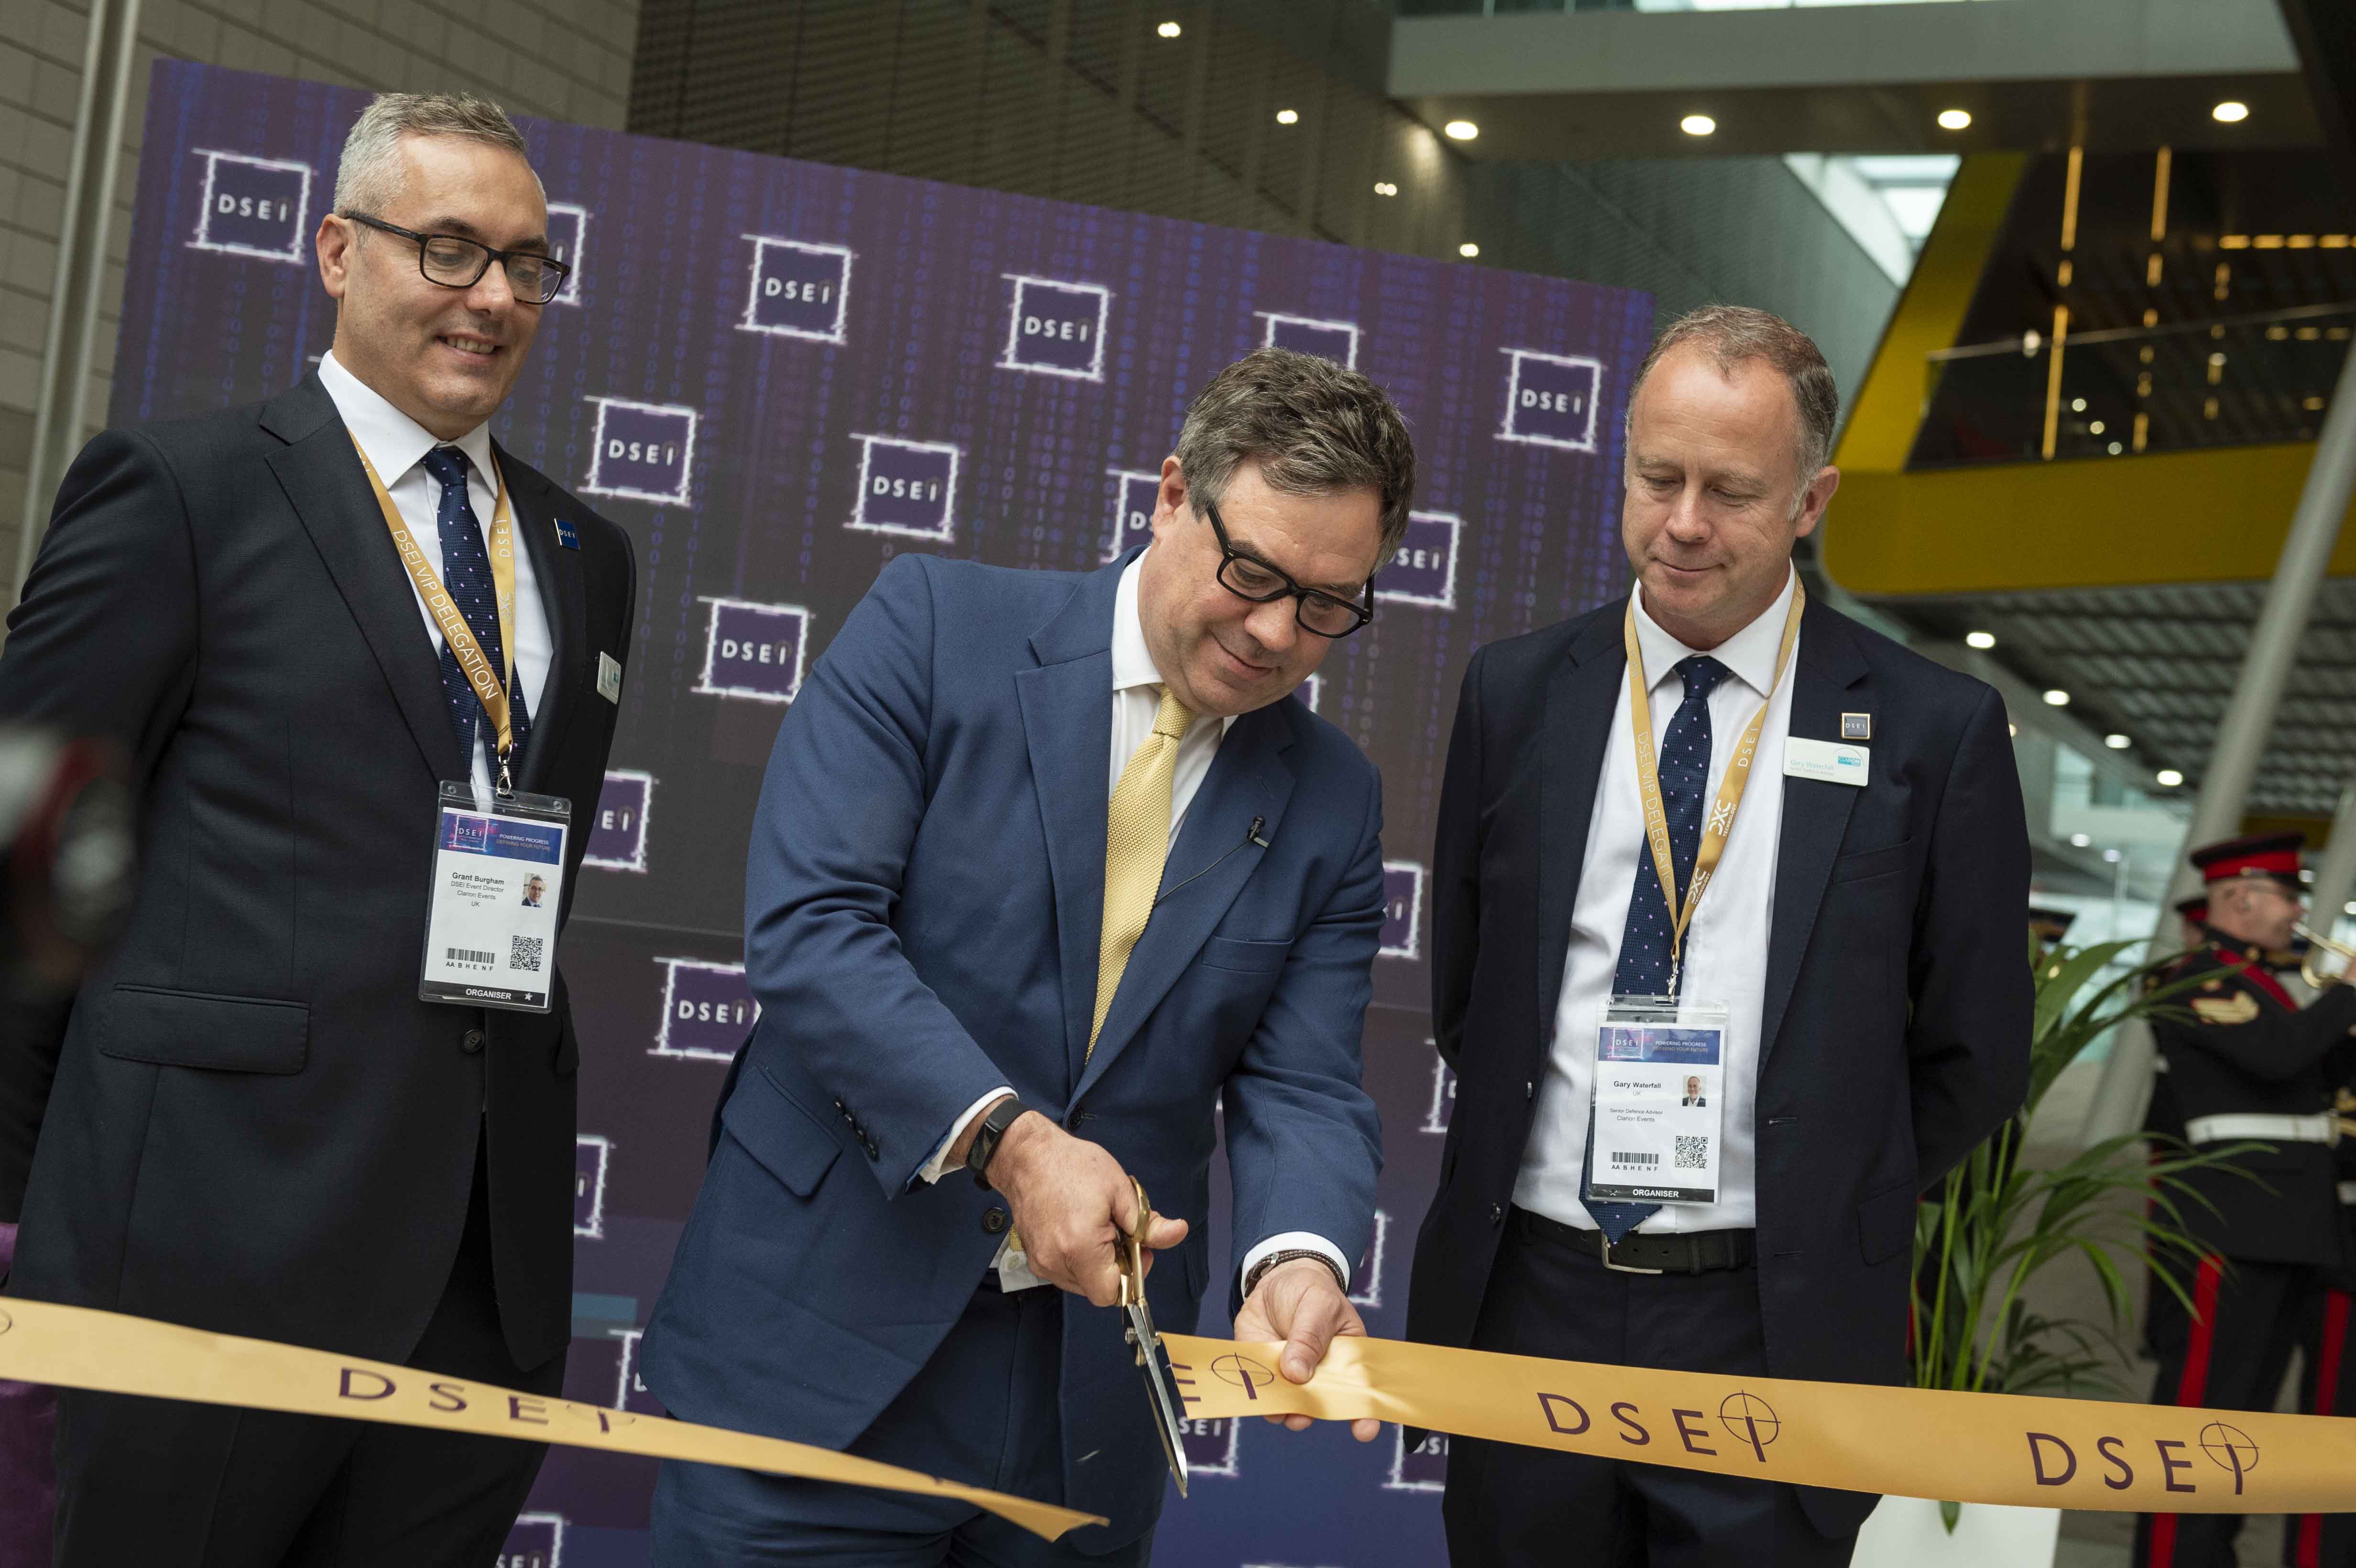 Minister for Defence Procurement, Jeremy Quin cuts the ribbon at the start of DSEI 2021